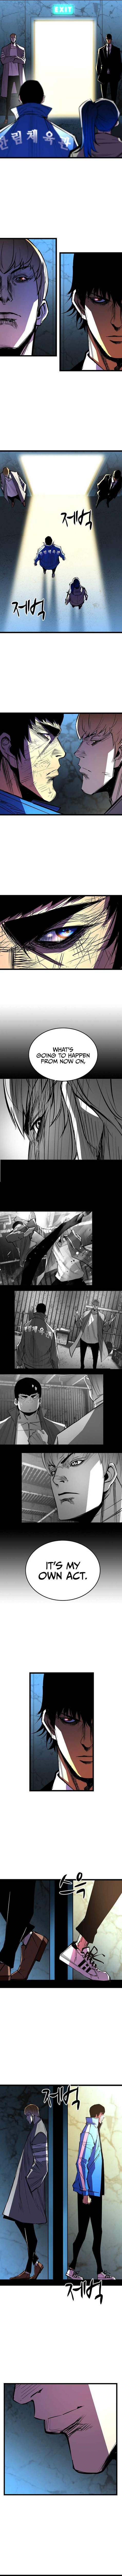 Hanlim Gym Chapter 103 page 7